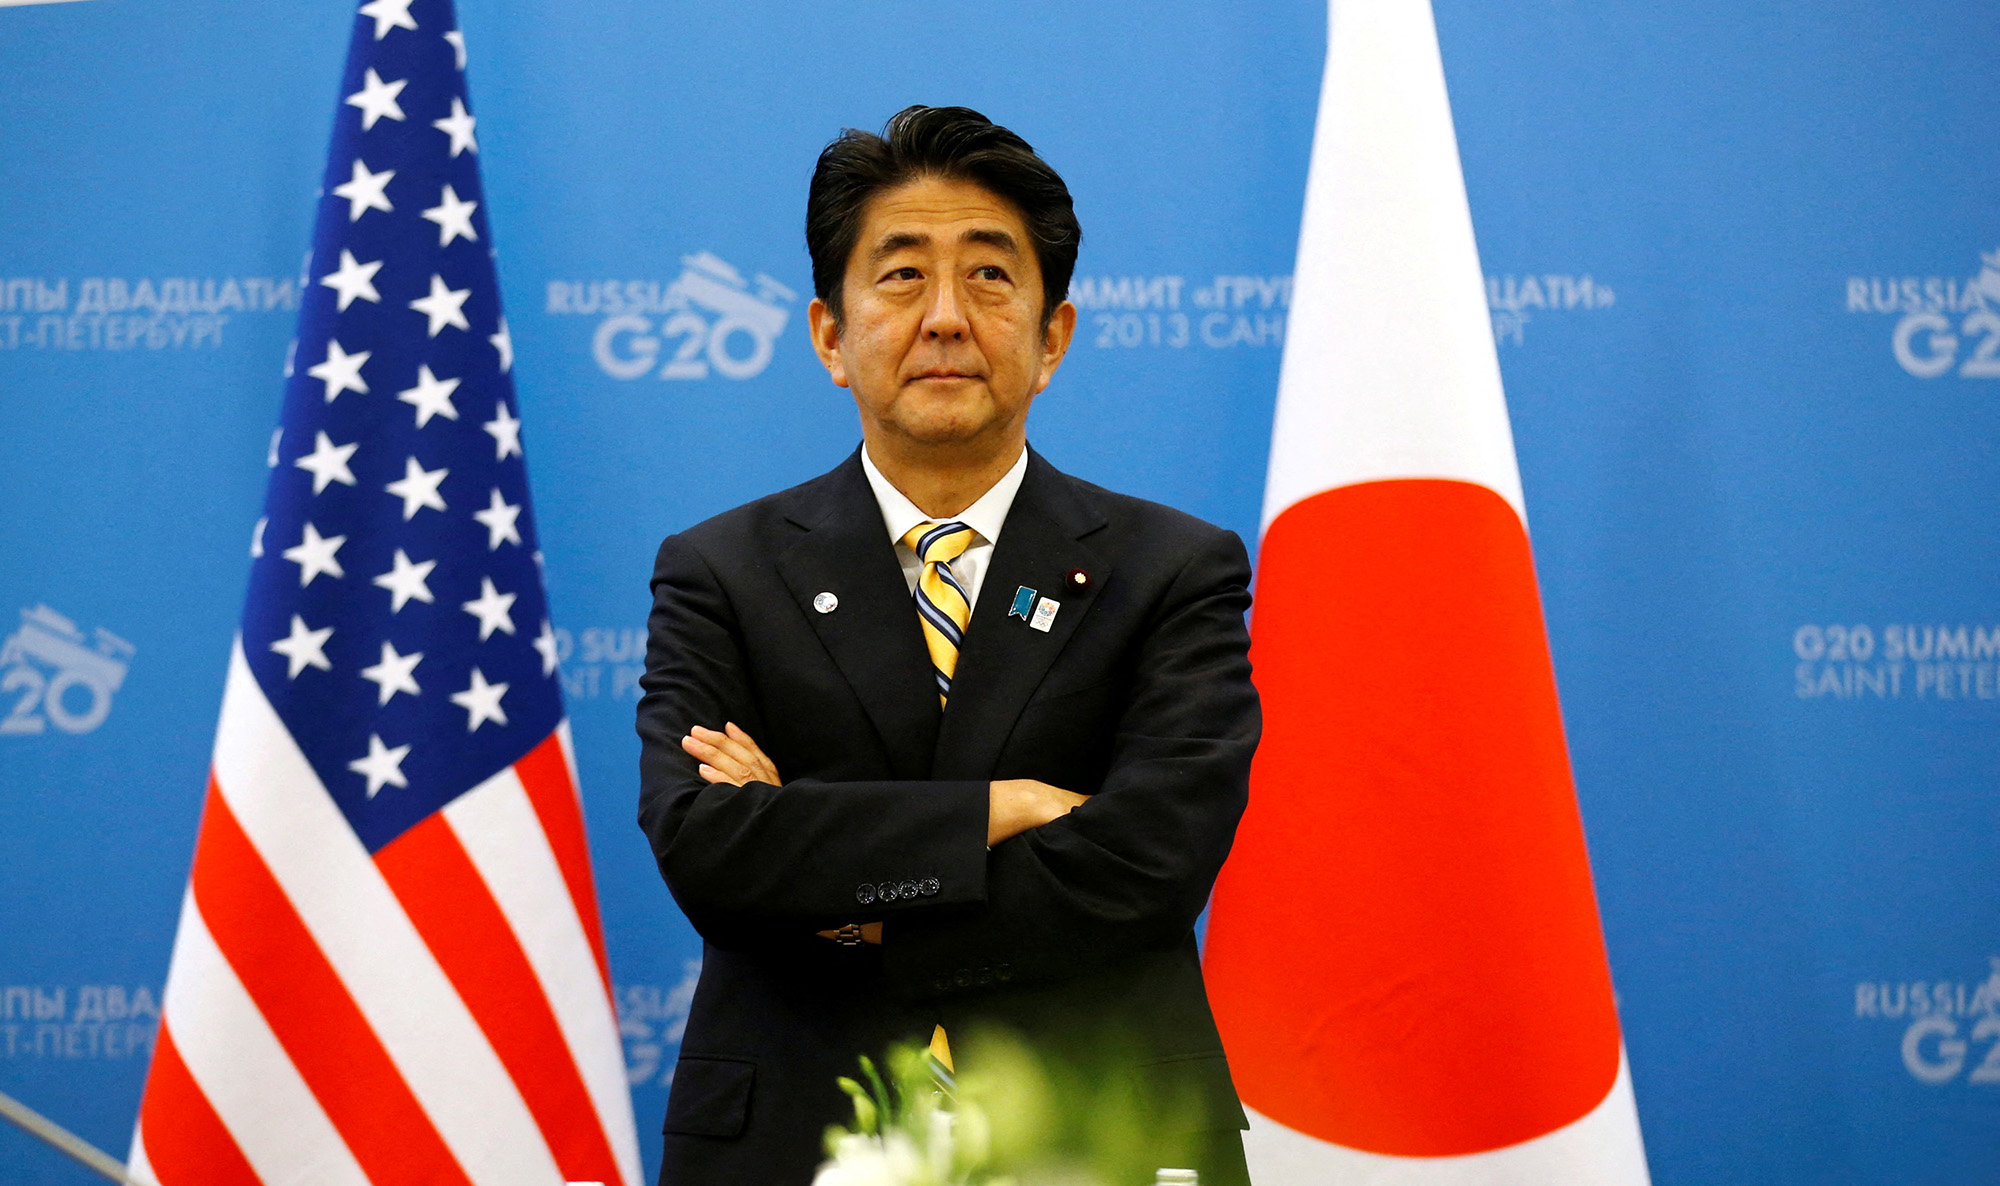 Former Japanese Prime Minister Shinzo Abe is seen at the G20 Summit in St. Petersburg, Russia on September 5, 2013. 